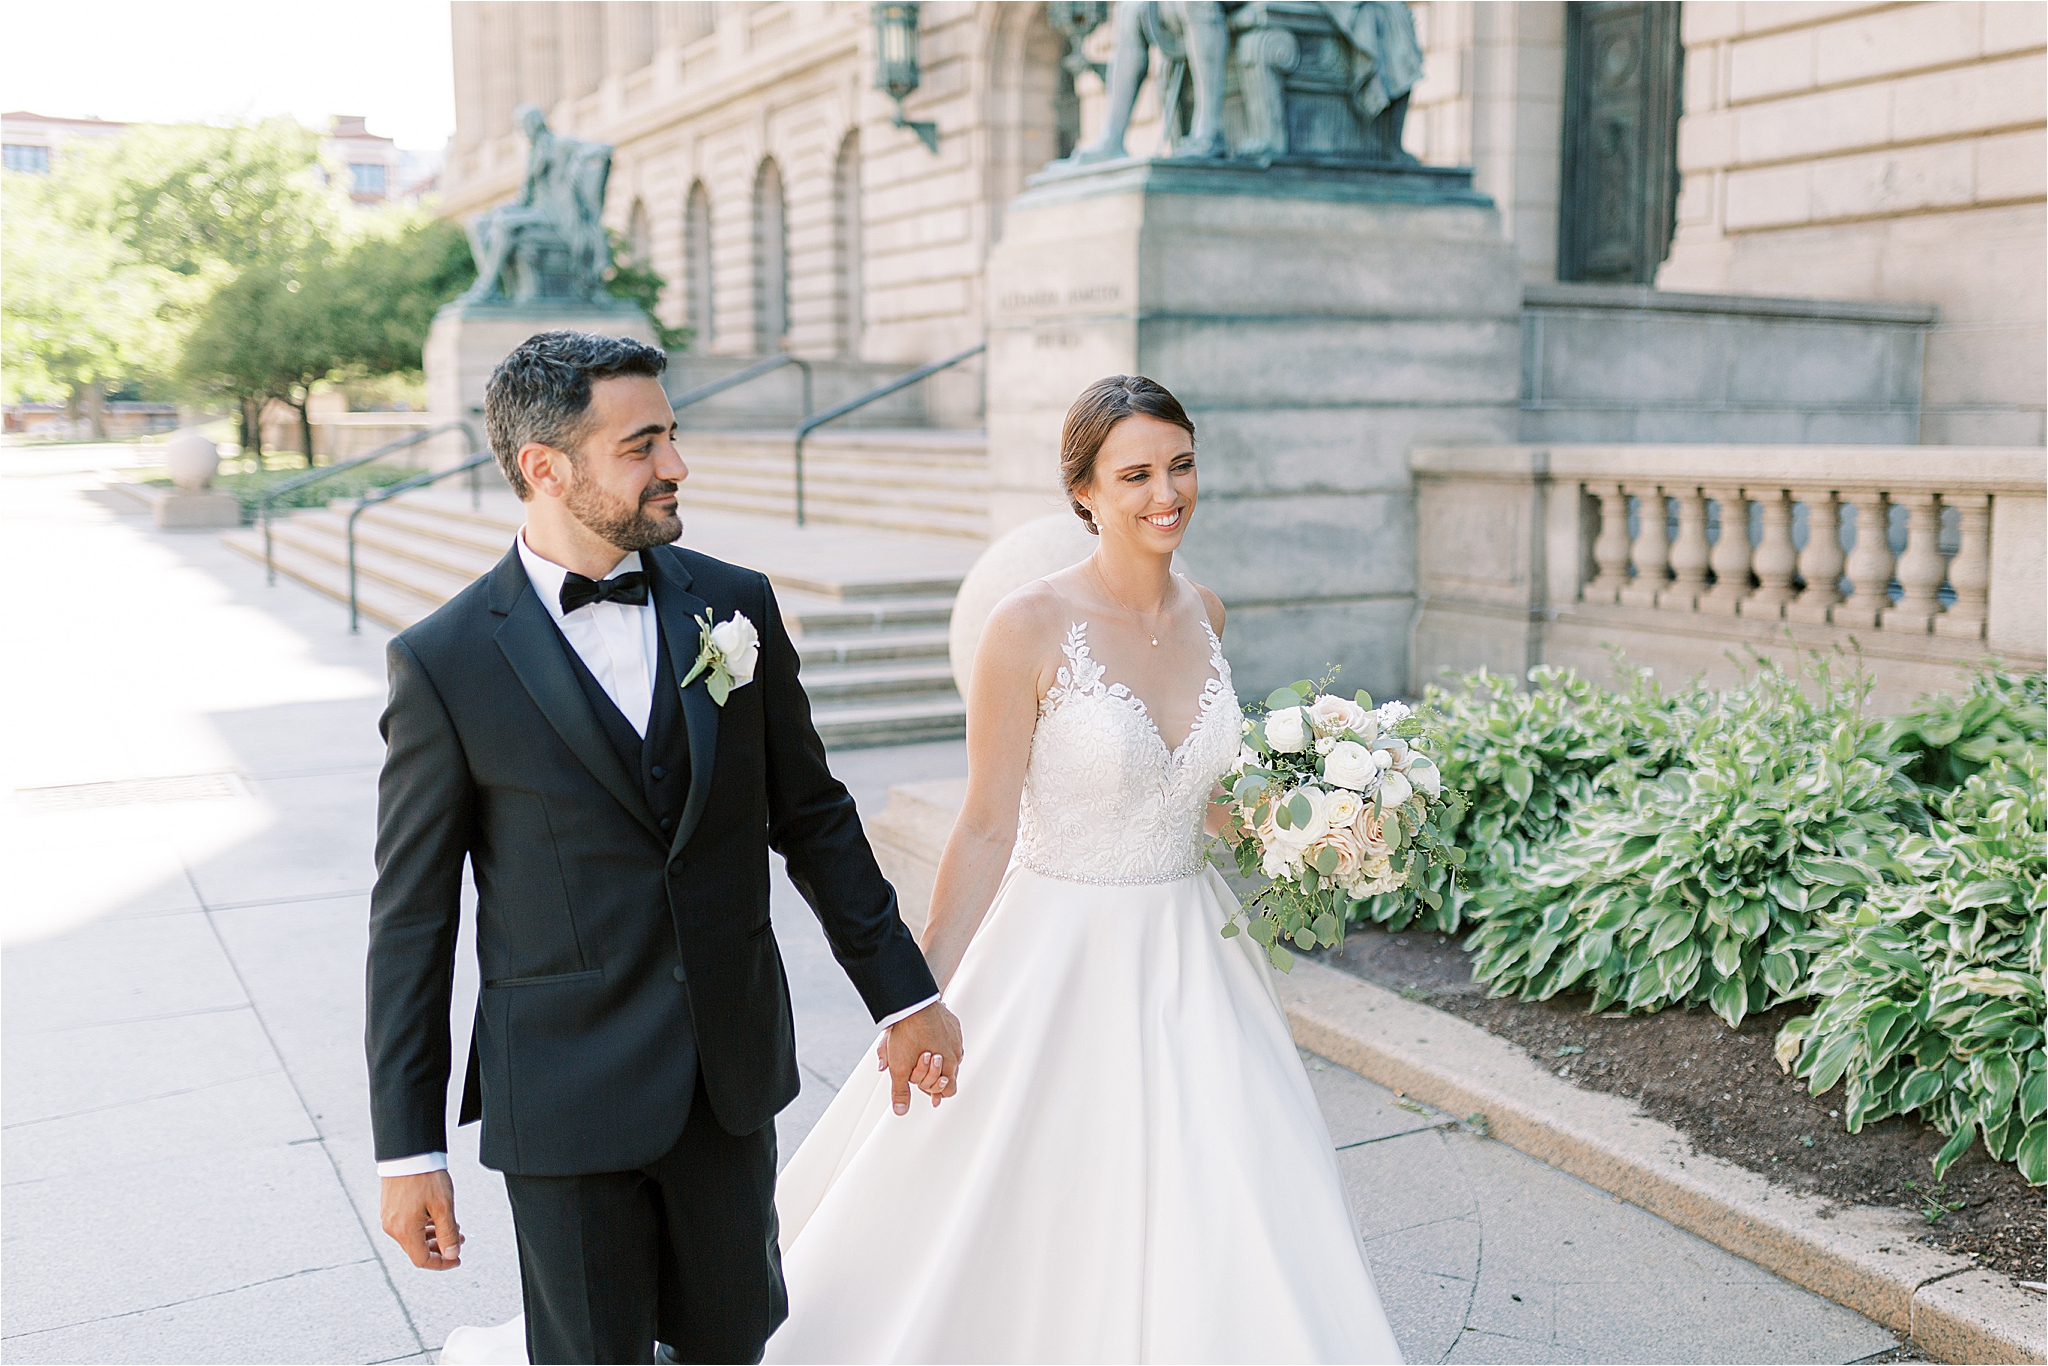 Bride and groom walking holding hands in front of Cleveland old courthouse